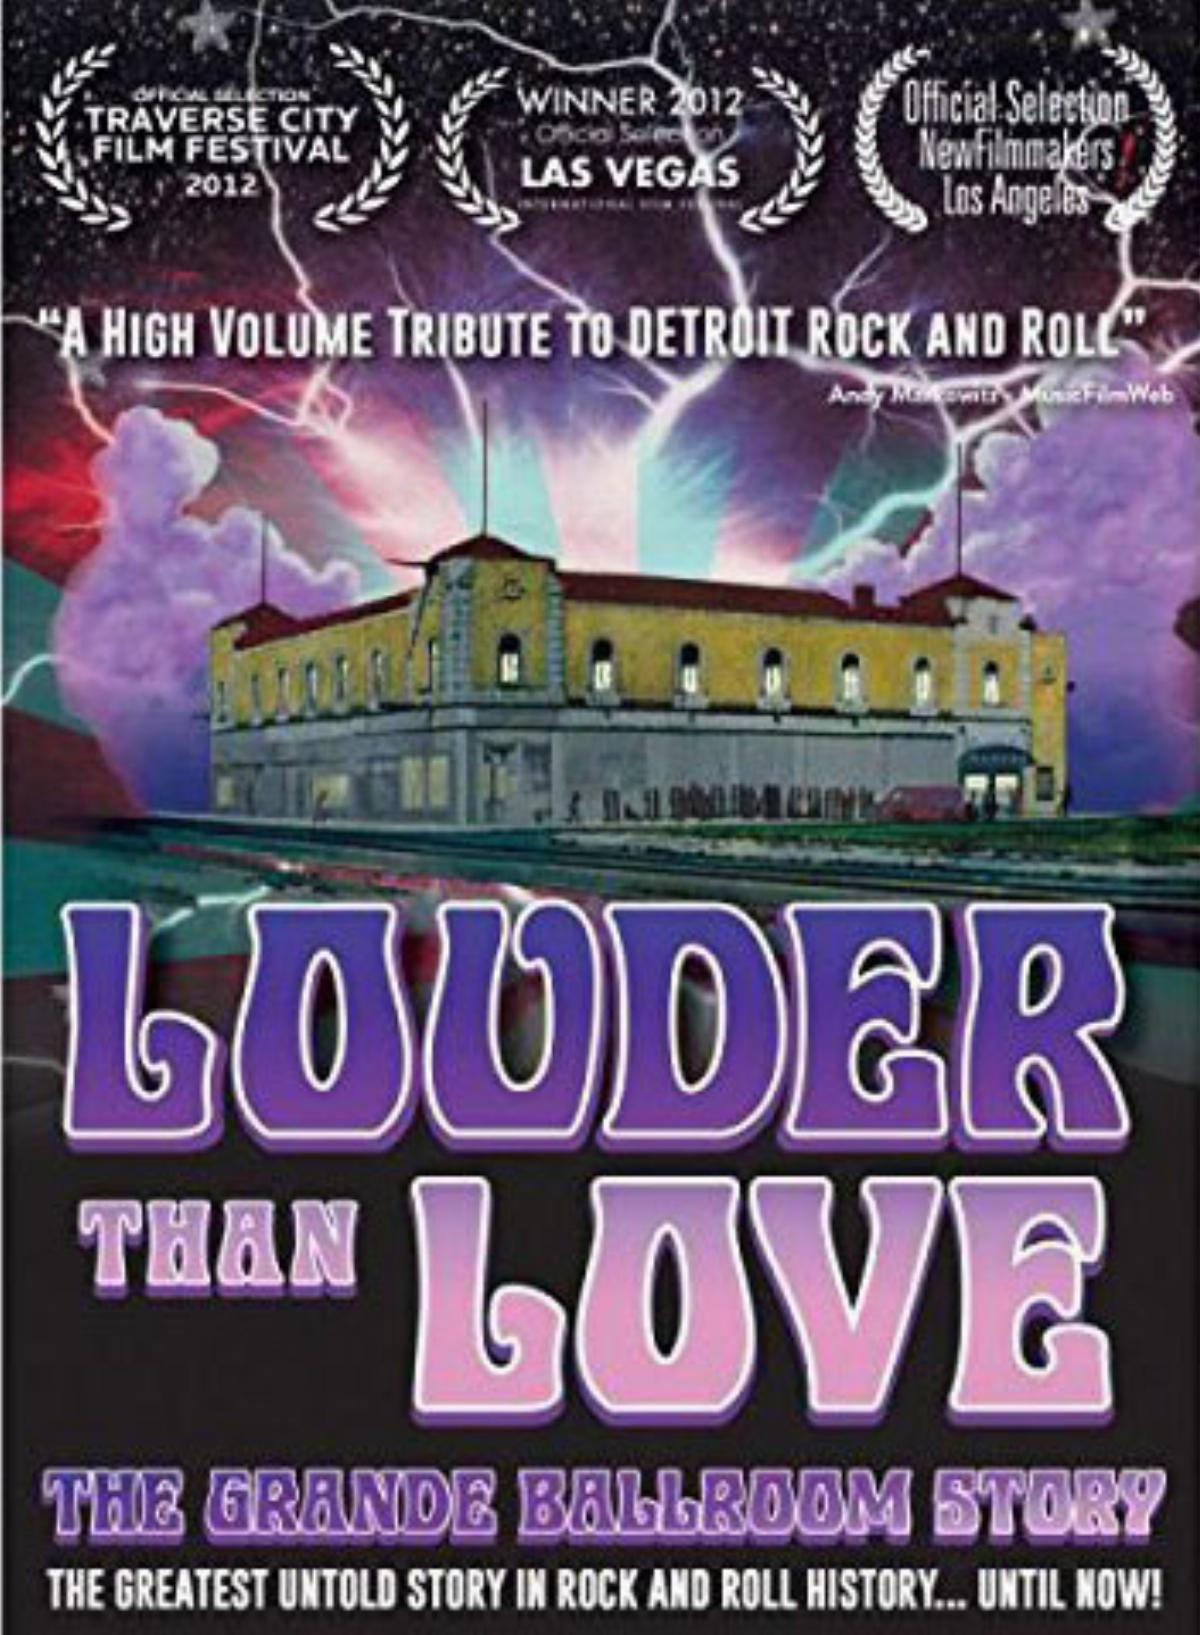 Live at The Acorn - "LOUDER THAN LOVE" - THE GREATEST UNTOLD STORY IN ROCK & ROLL HISTORY